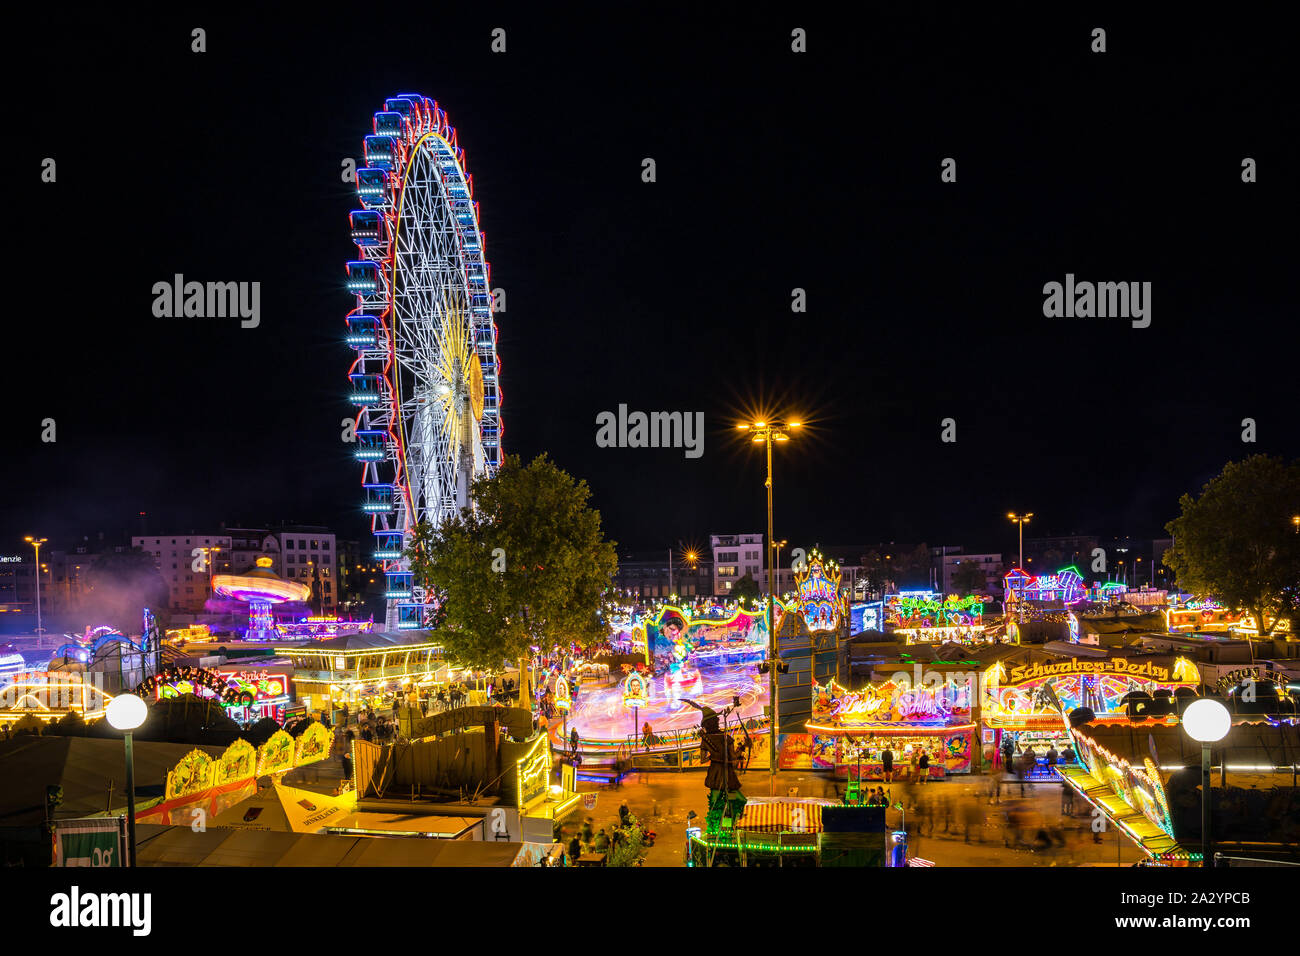 Stuttgart, Germany, October 3, 2019, Canstatter wasen oktoberfest folk festival illuminating the night with many carousel, big wheel and food offers b Stock Photo